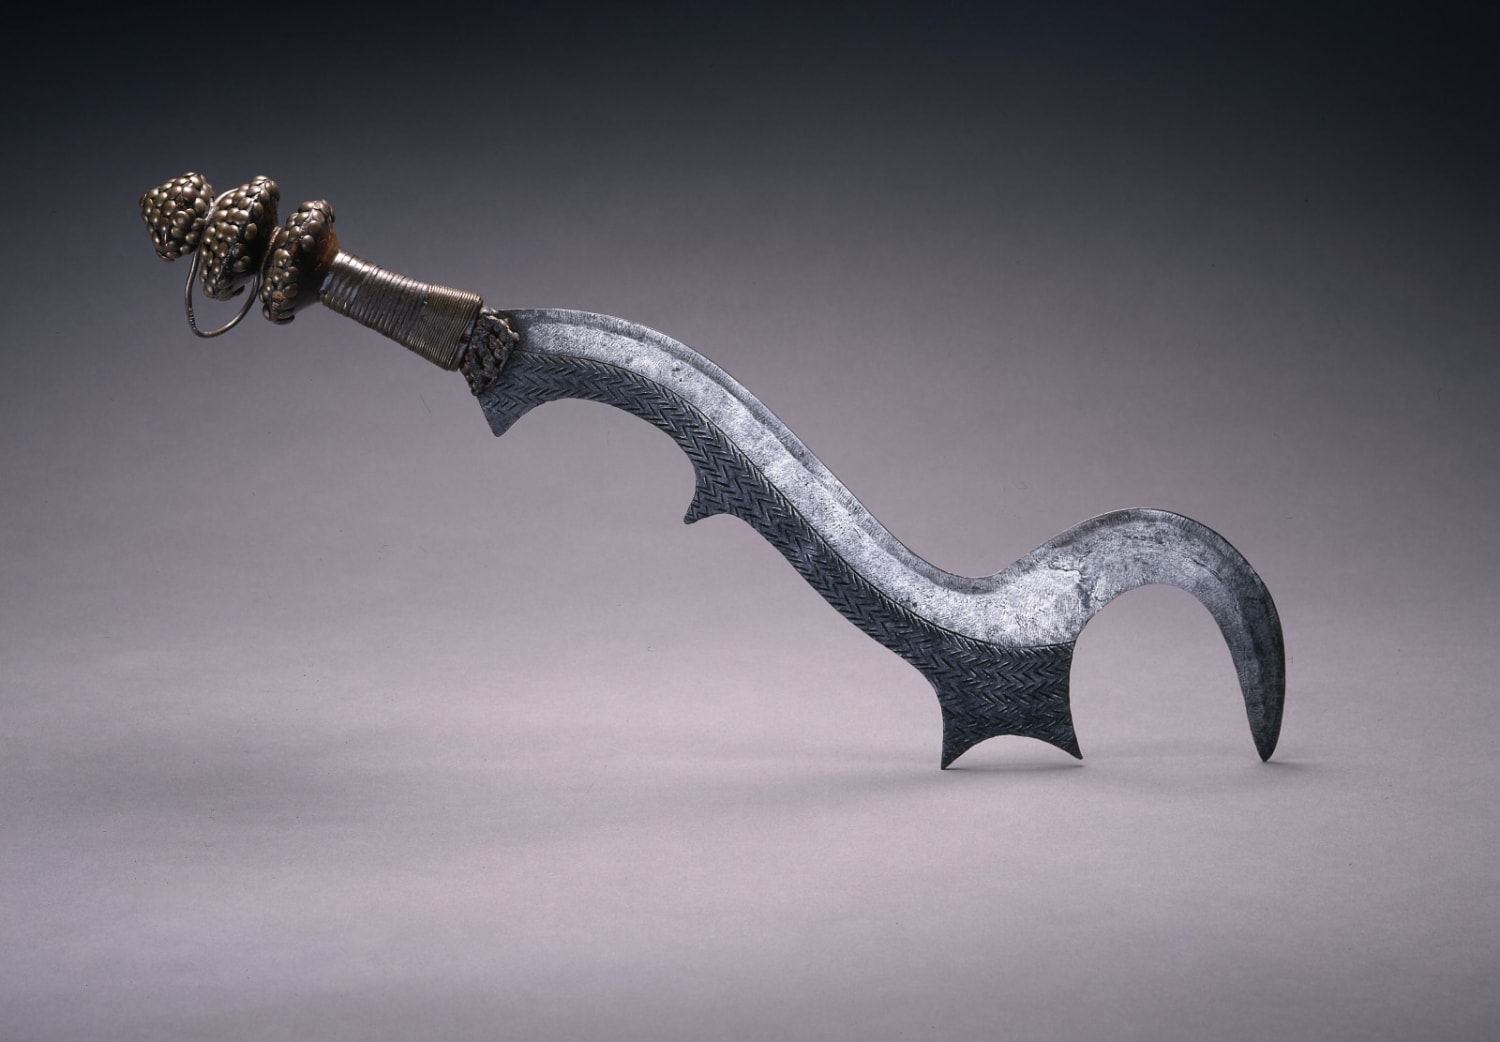 A Ngulu (an execution sword) made by a Ngala artist in late 19th century–early 20th century. From the Democratic Republic of the Congo, now part of the collection of the the Saint Louis Art Museum